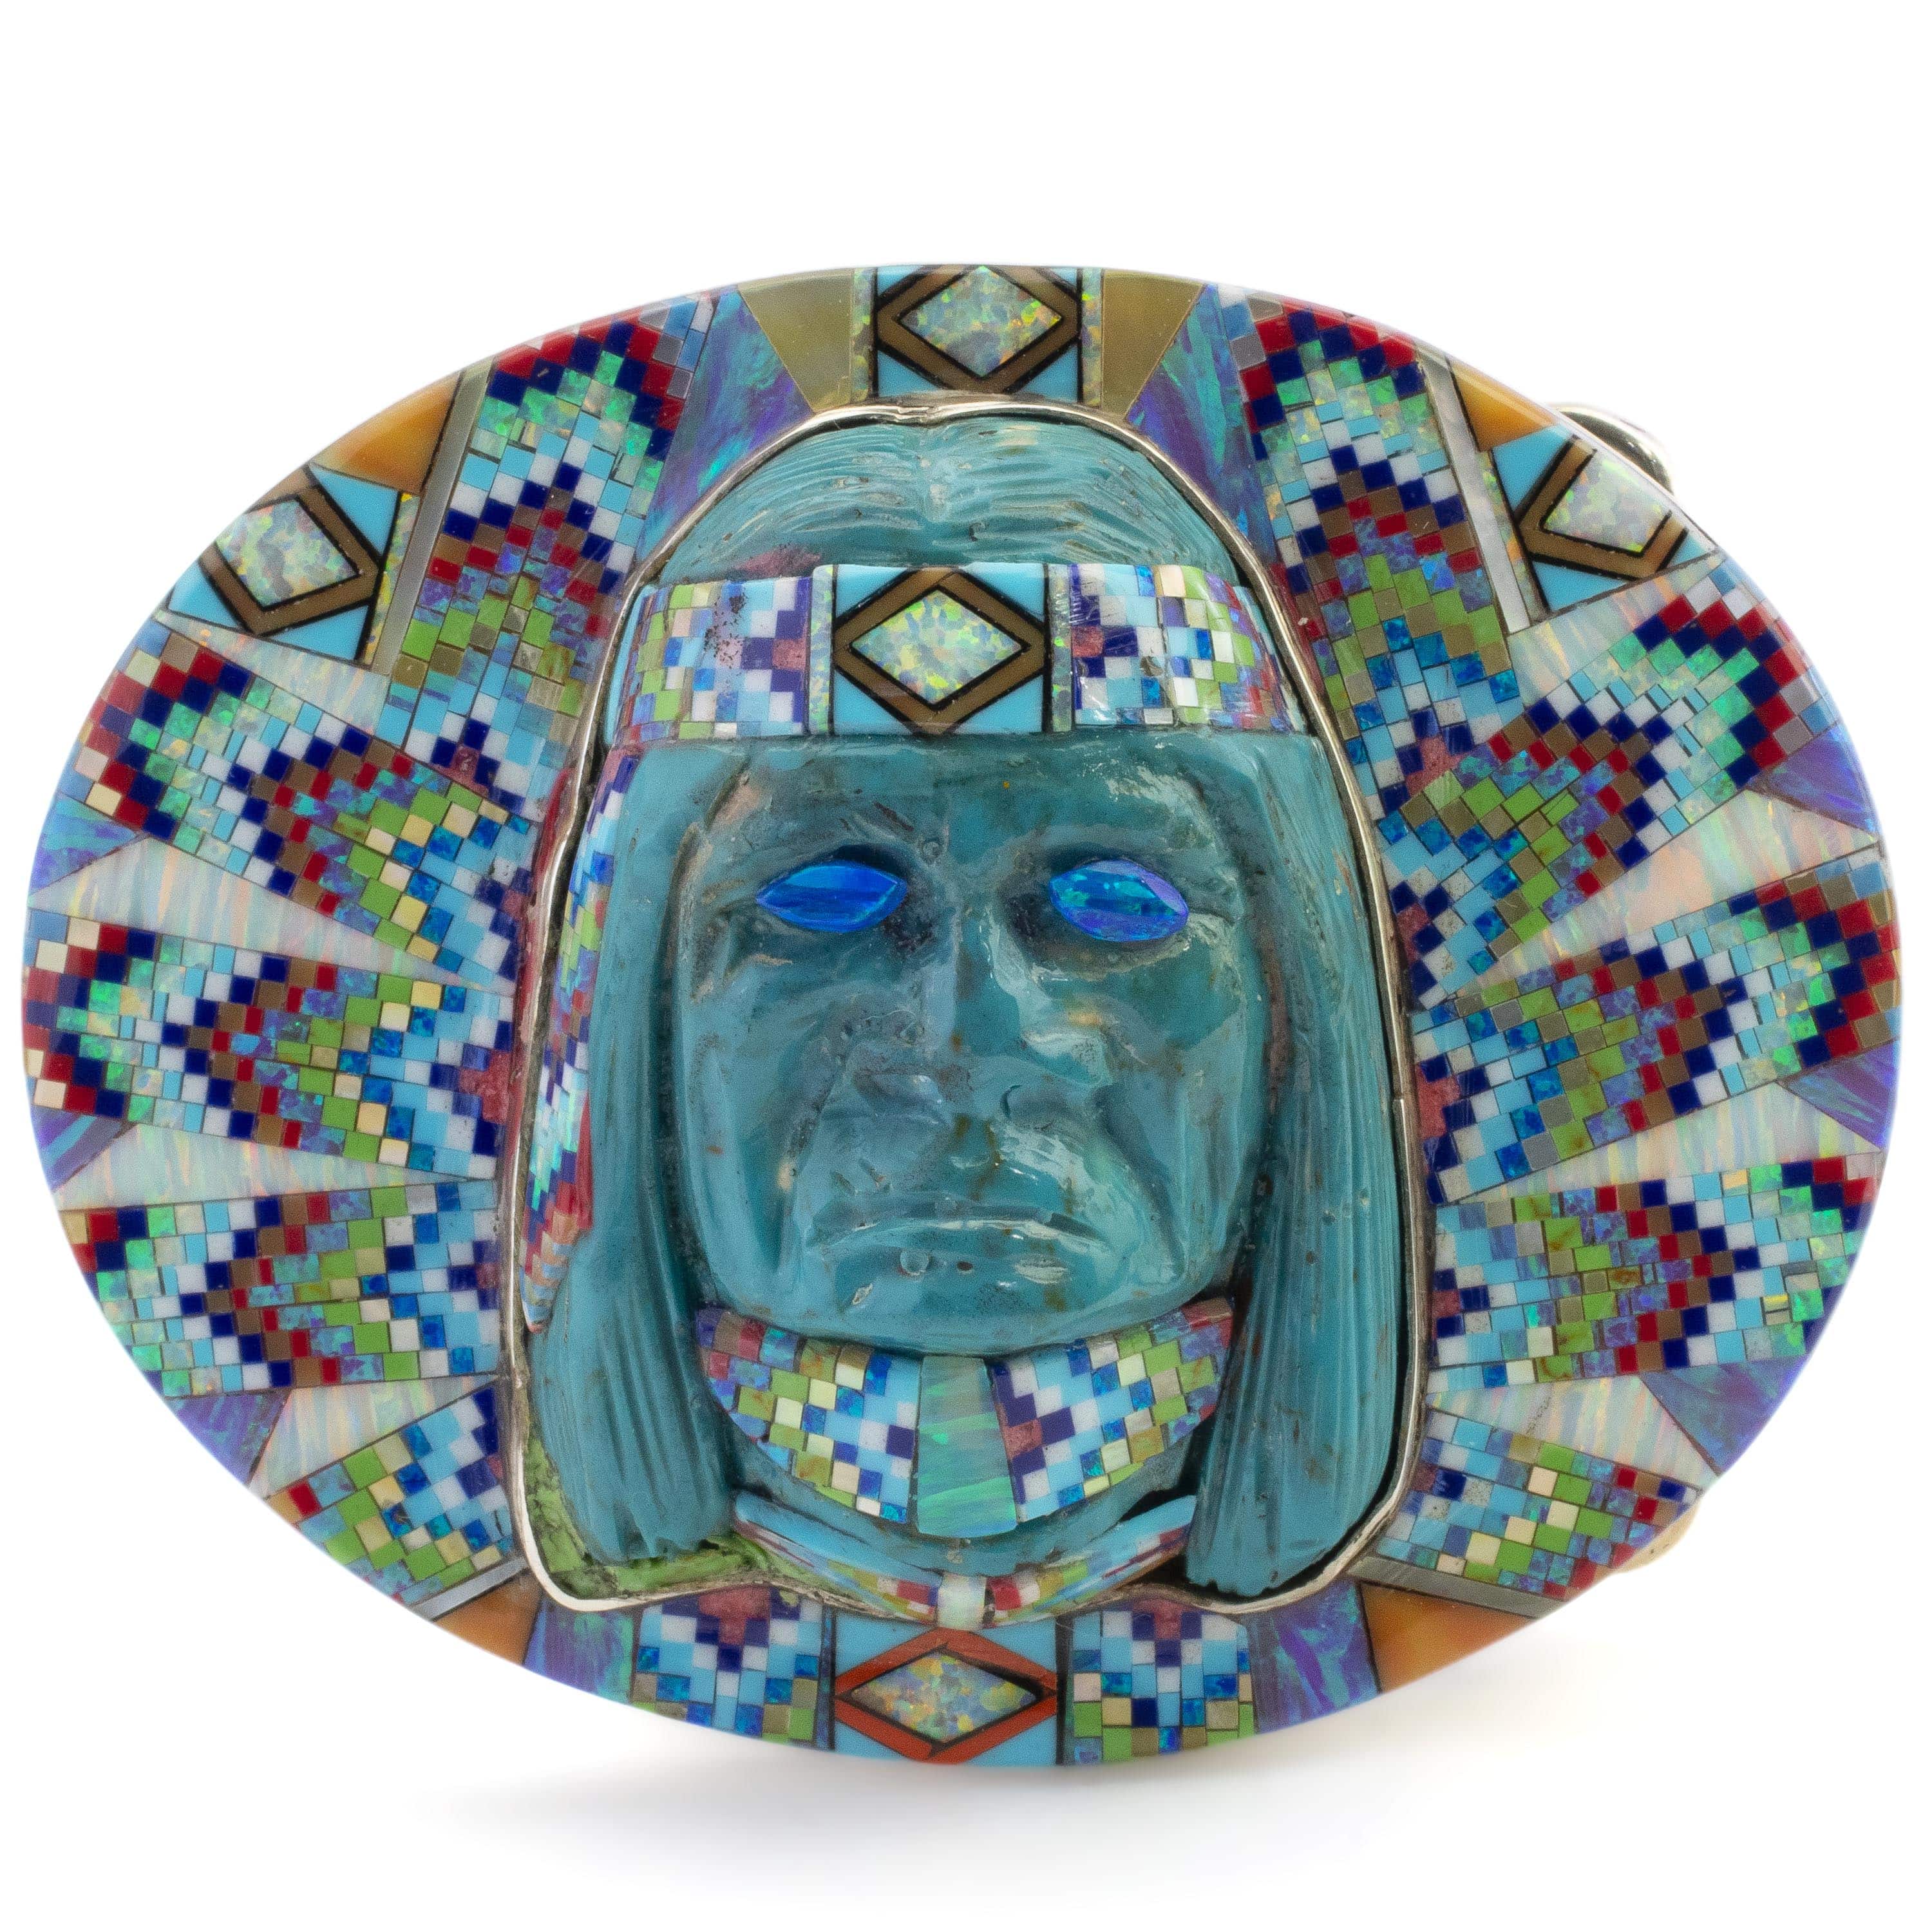 KALIFANO Southwest Silver Jewelry Multi Gem Opal Micro Inlay with Genuine Turquoise Indian Chief Handmade 925 Sterling Silver Oval Belt Buckle AKBB2400.002